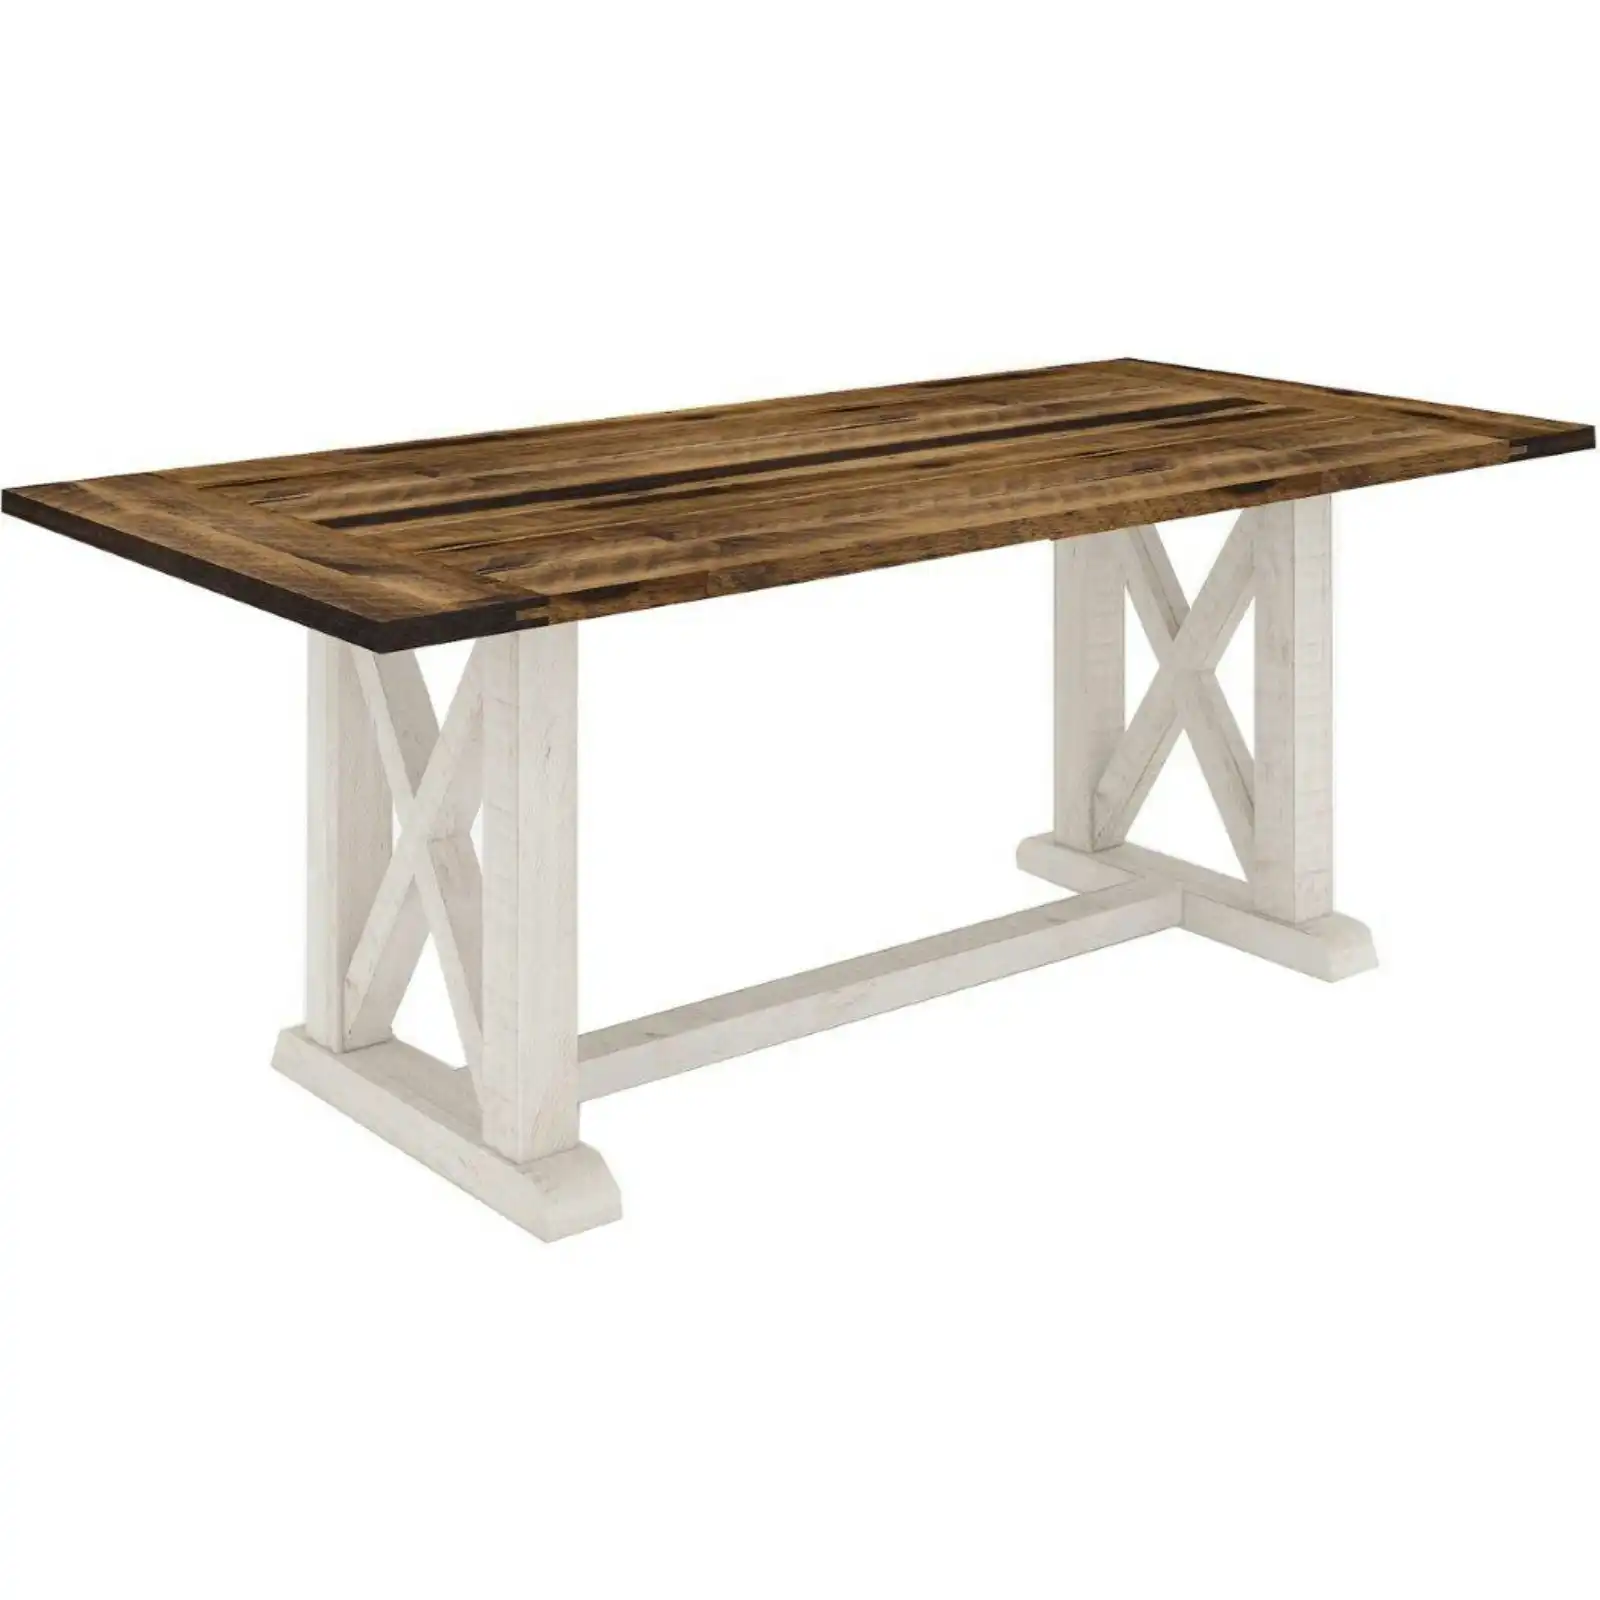 Erica 240cm Dining Table